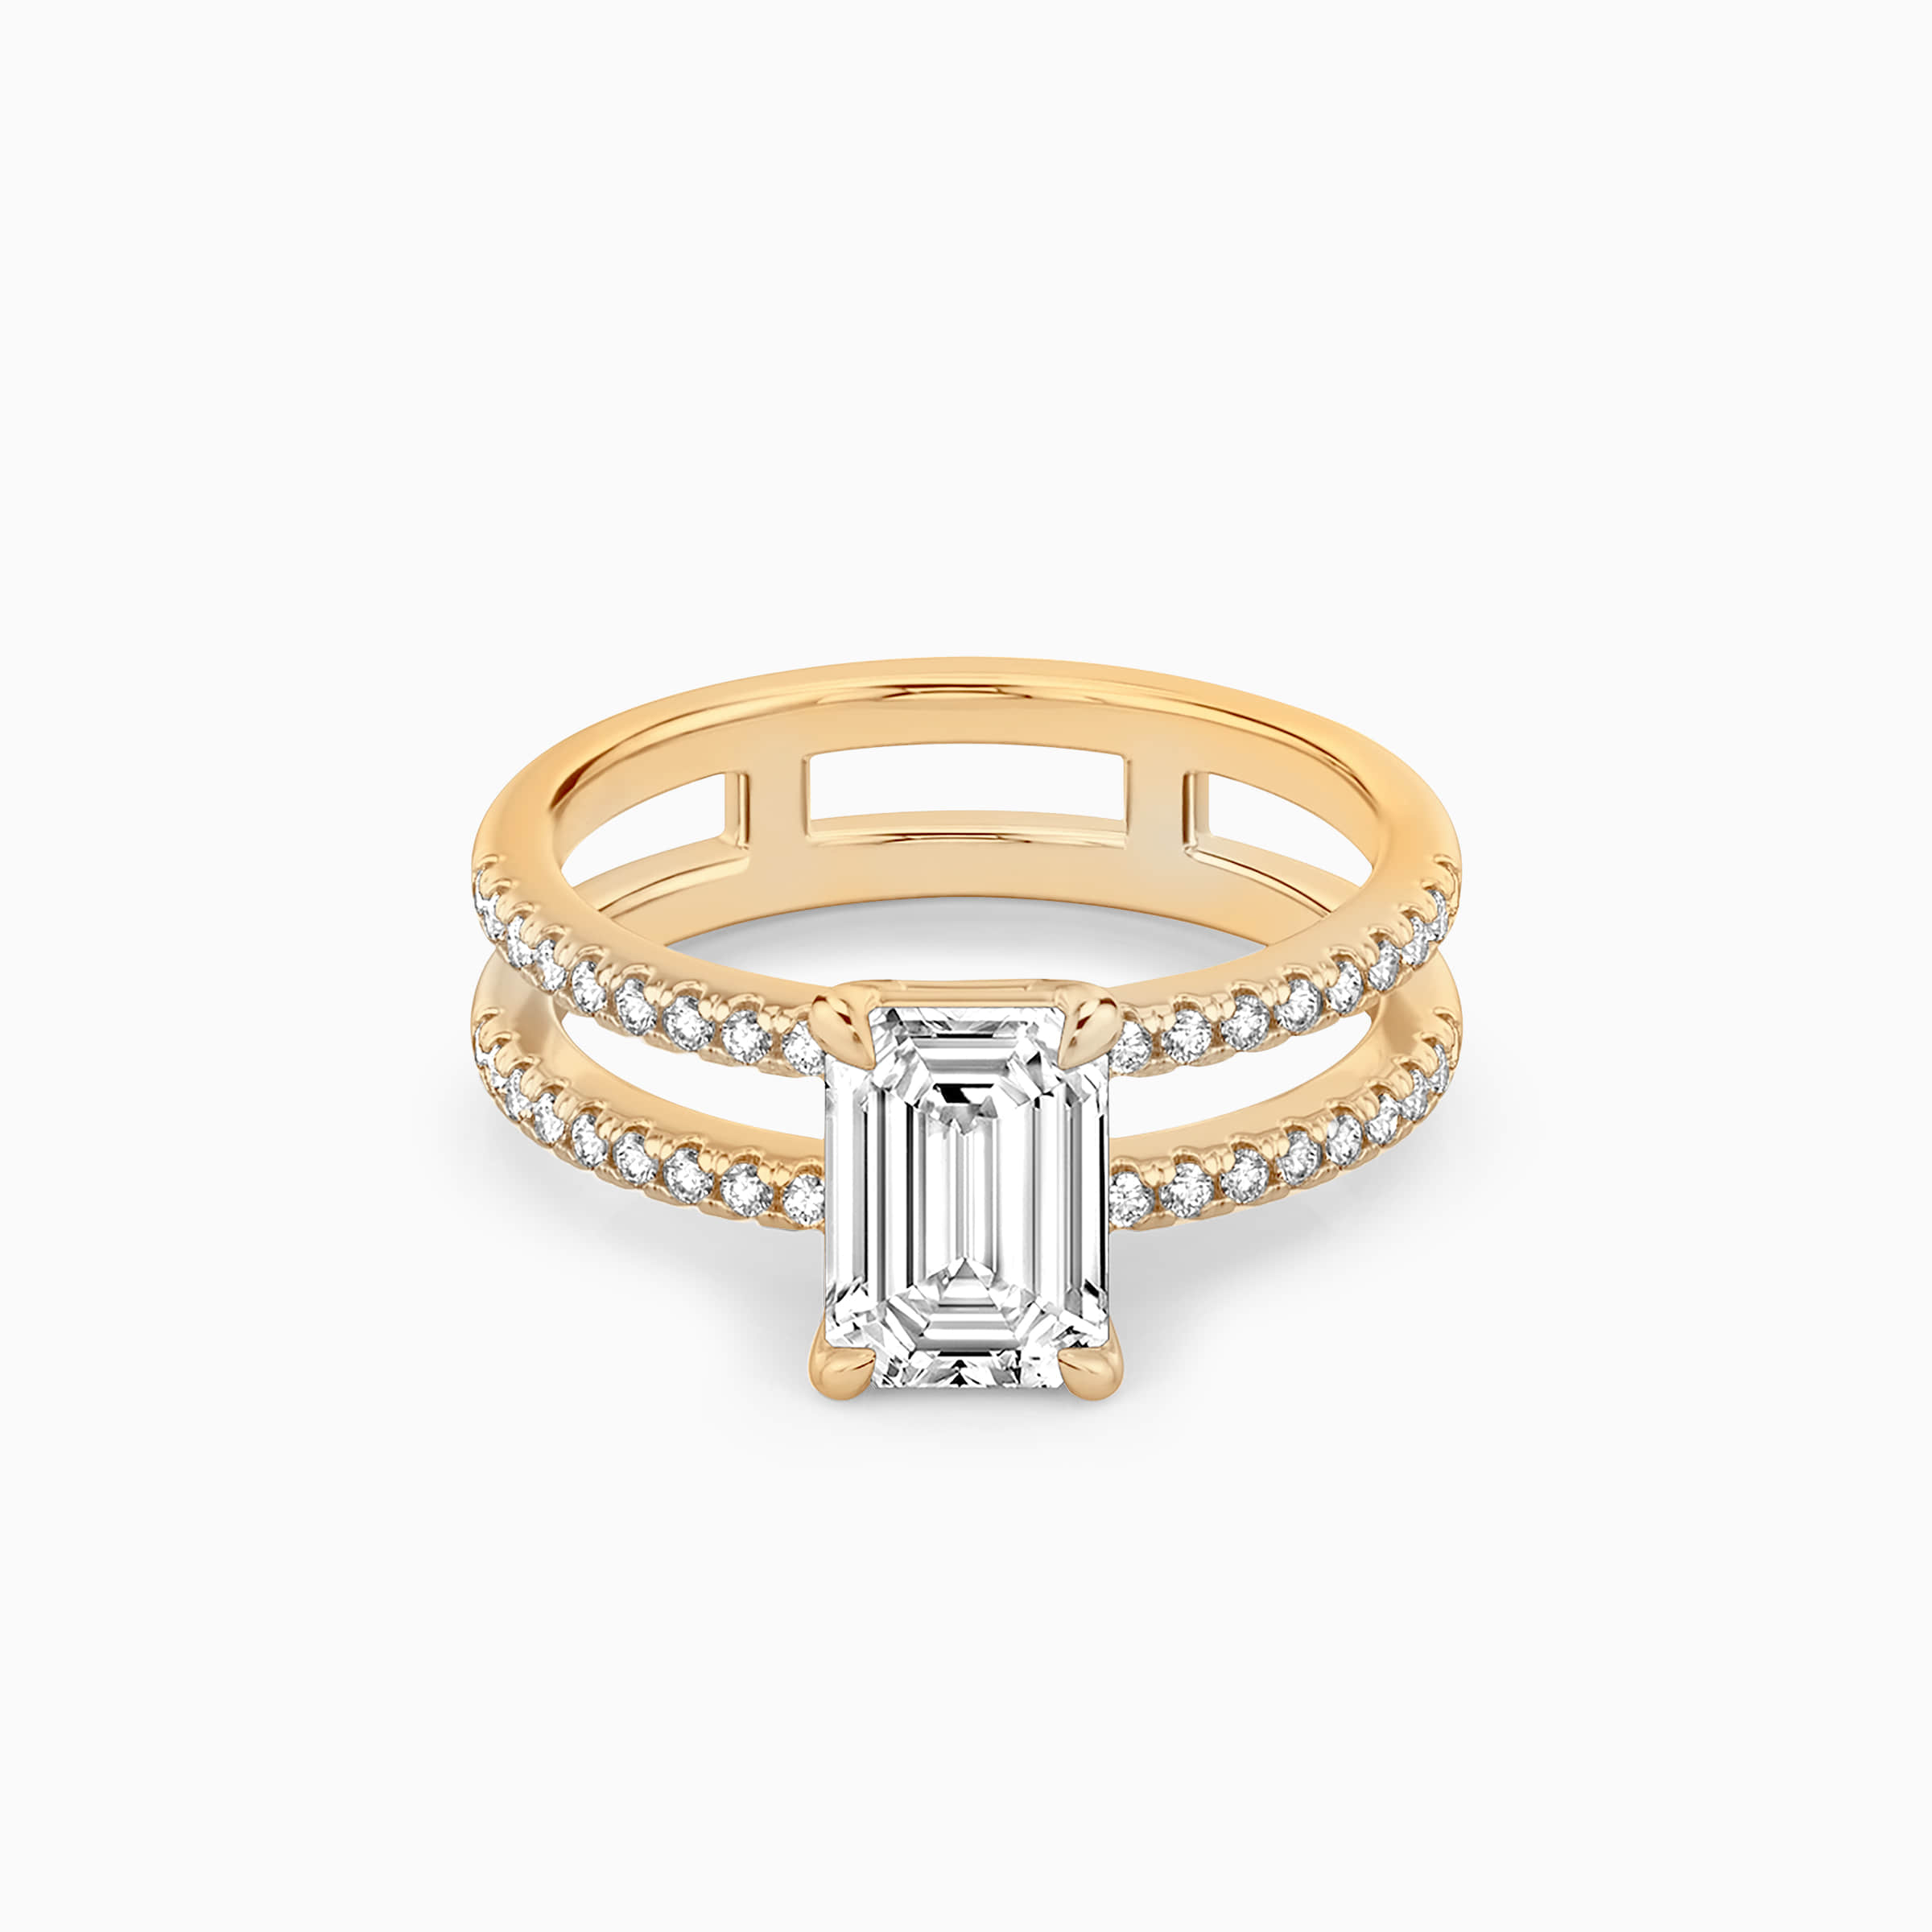 Darry Ring double band emerald cut engagement ring yellow gold